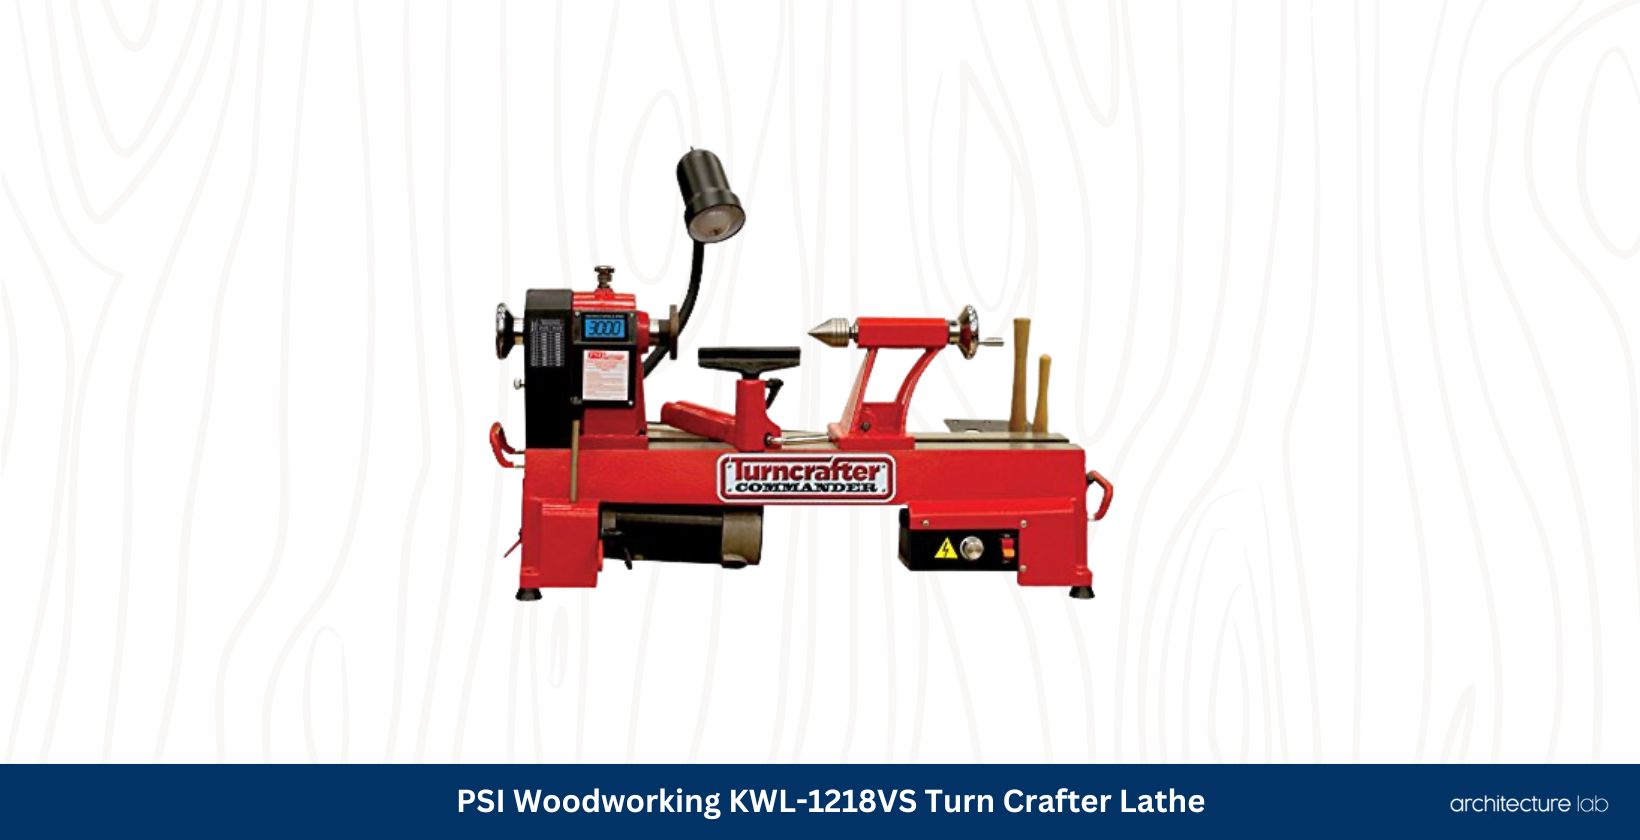 Psi woodworking kwl 1218vs turn crafter lathe